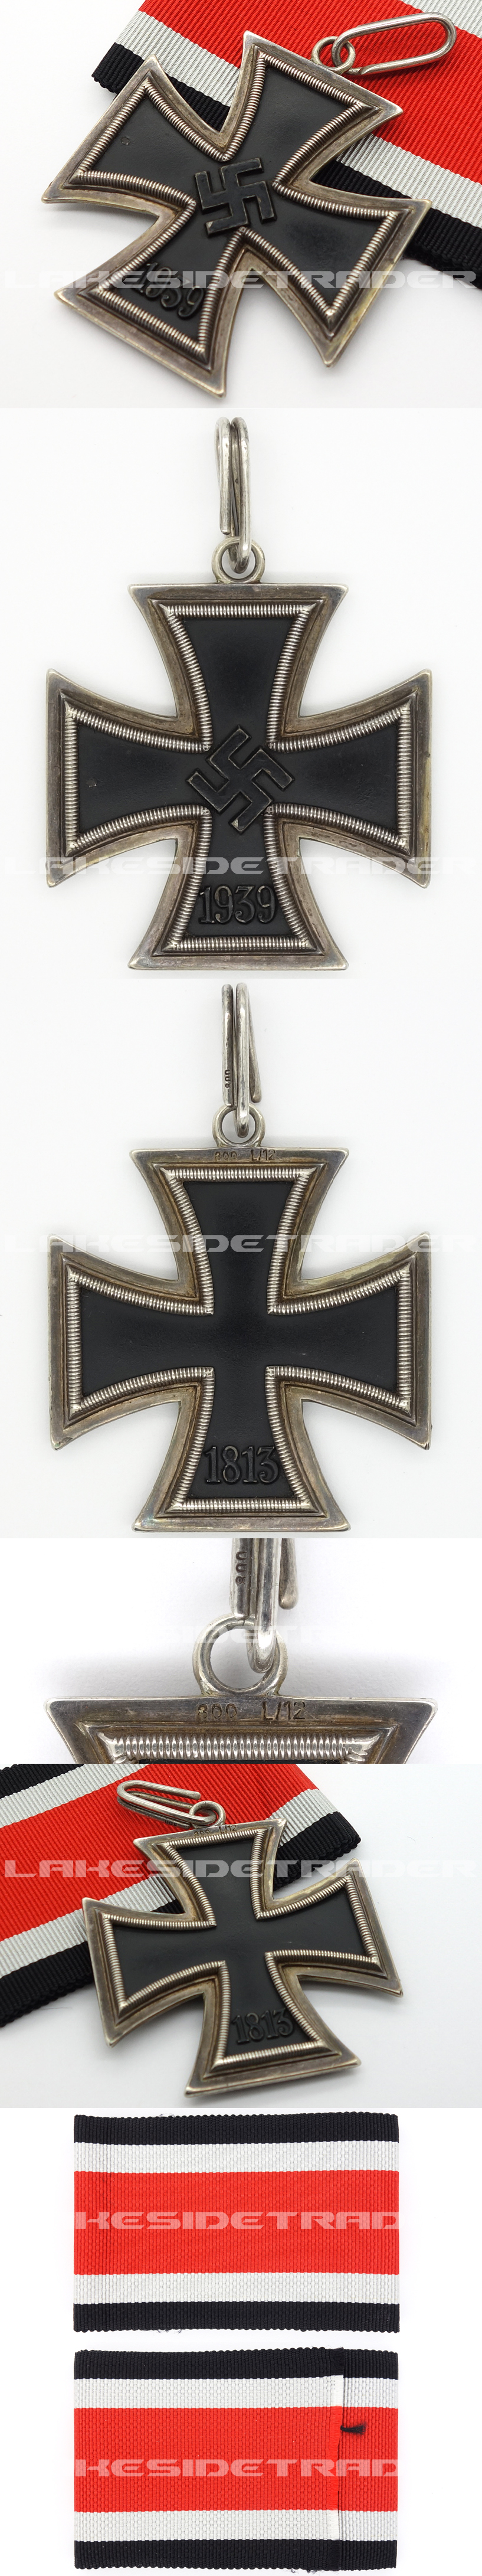 Knights Cross of the Iron Cross by L/12